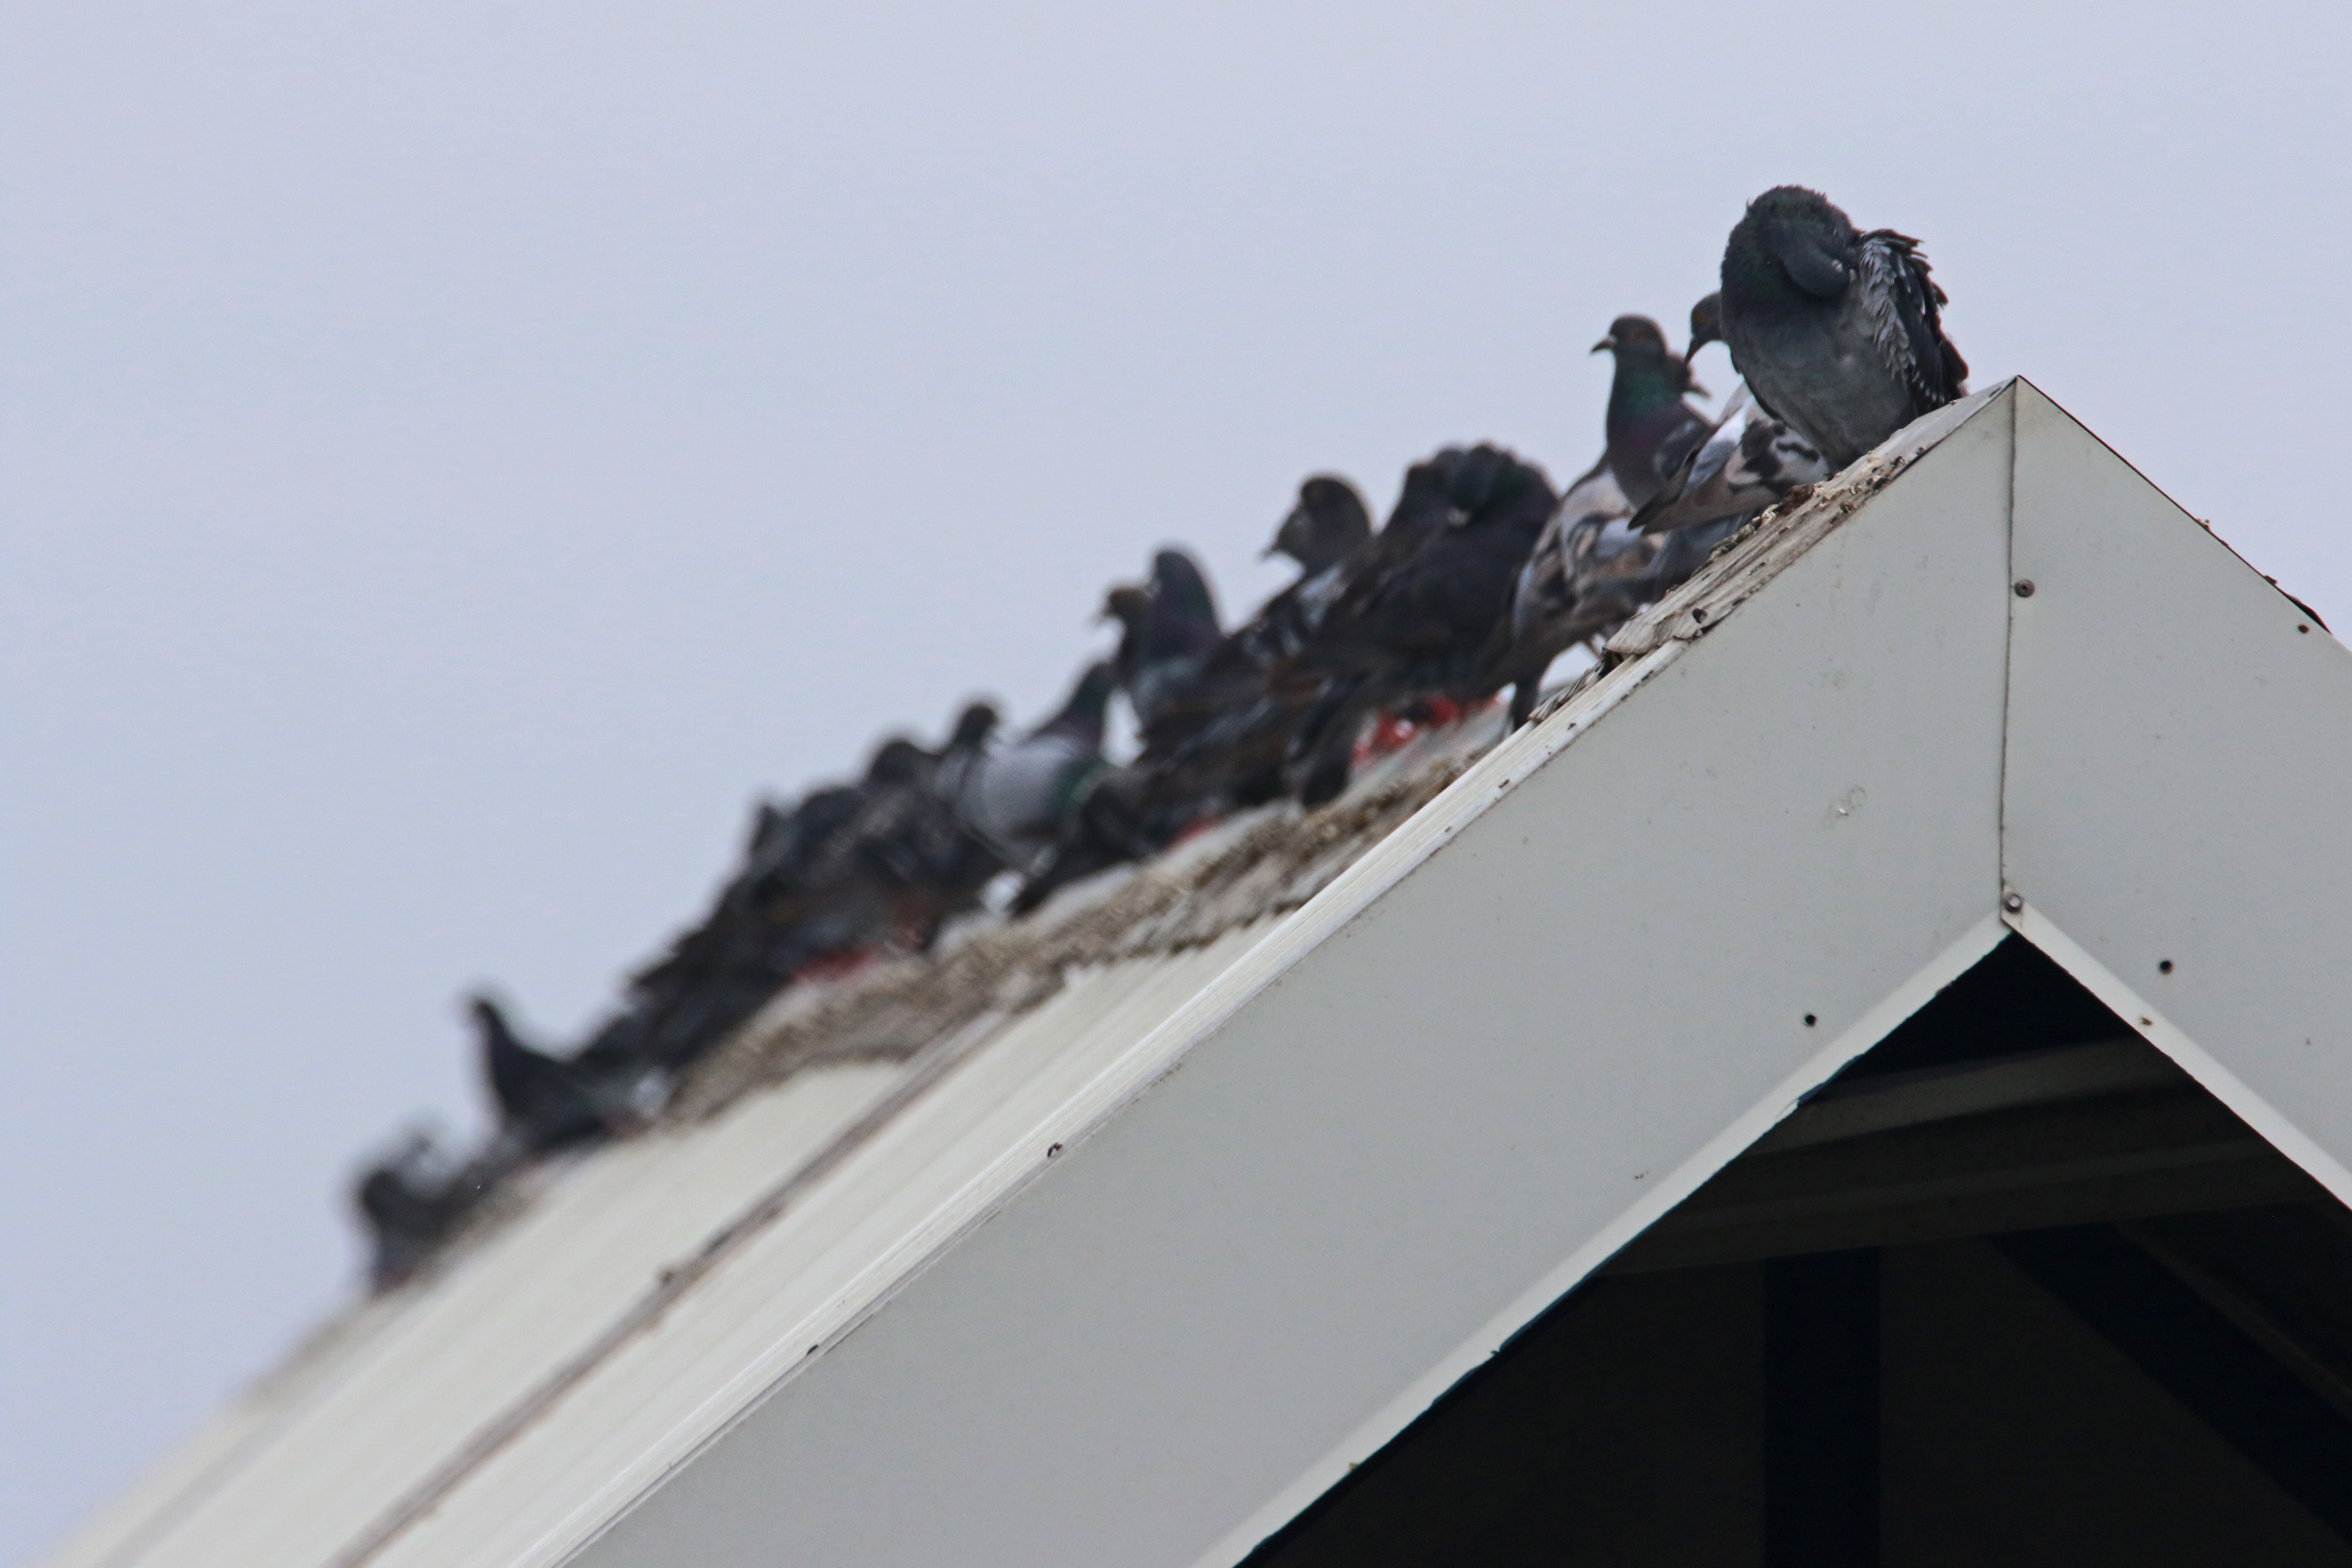 Flock of pigeons on the roof, Flock of pigeons on the roof